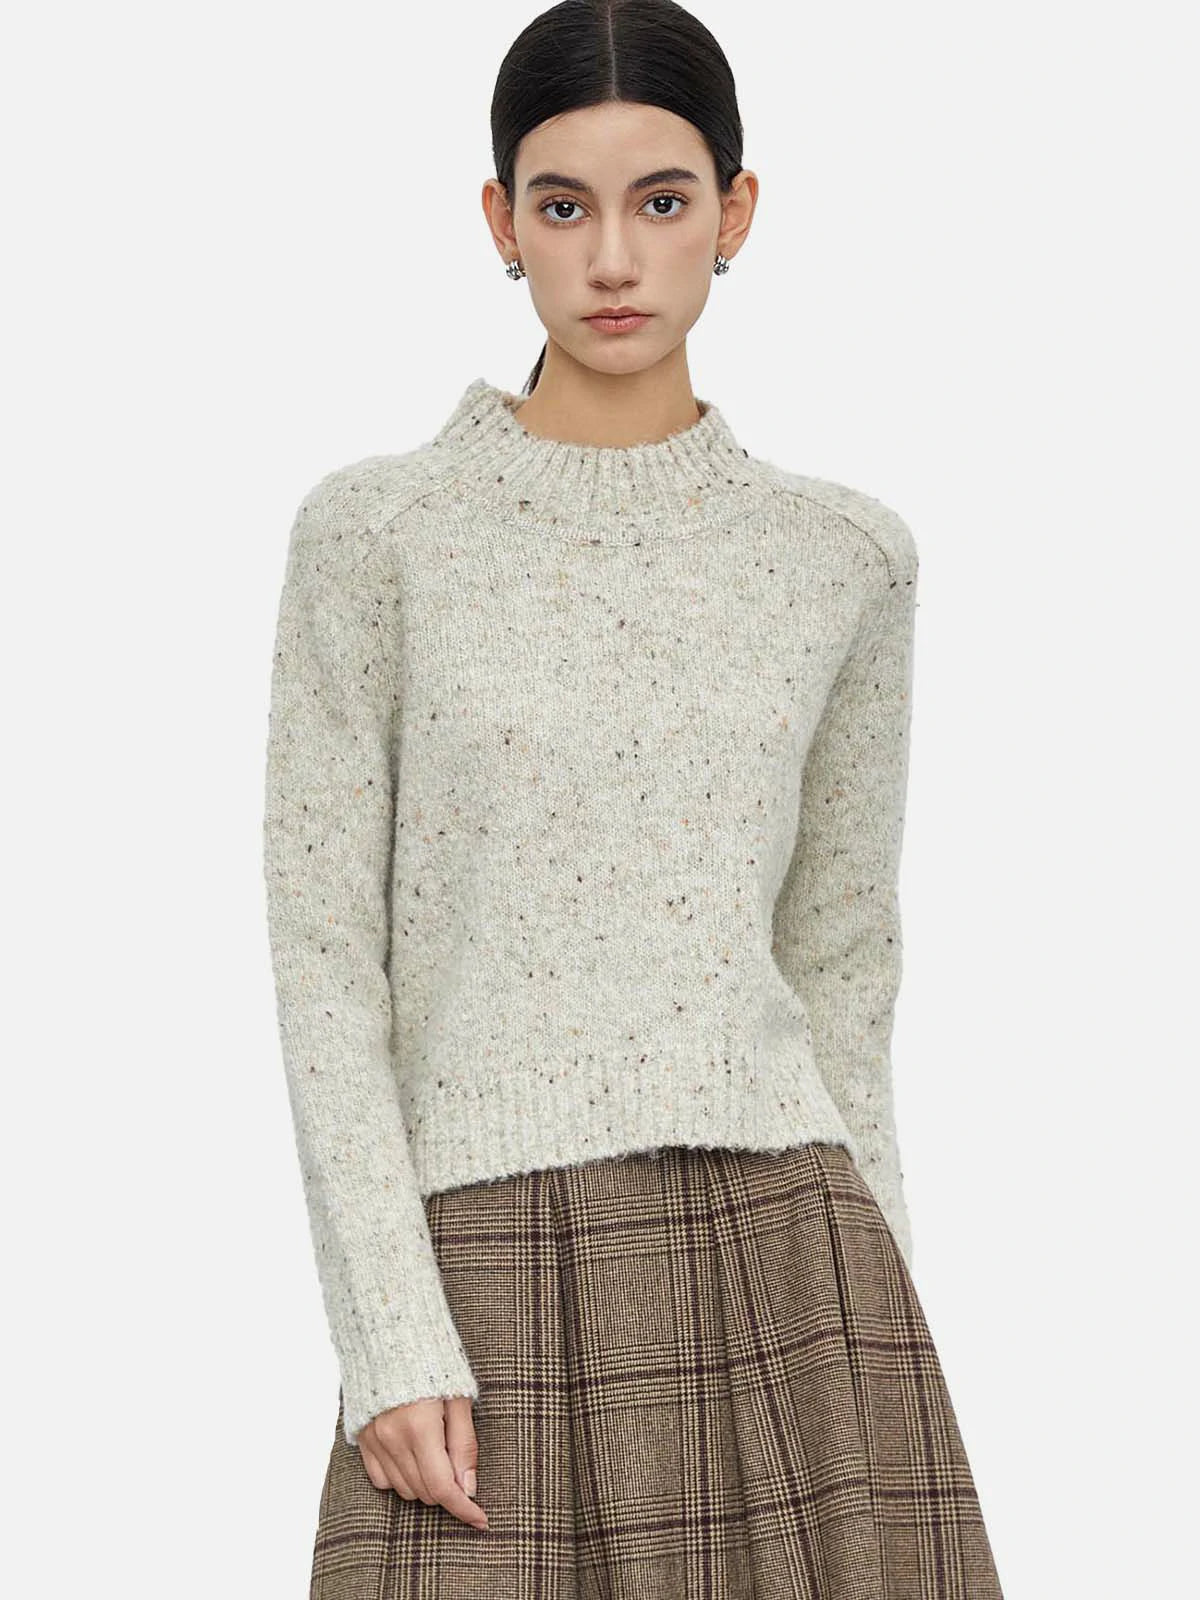 Cozy Loose-Fit Knit Pullover with Playful Polka Dot Pattern and Stylish Ribbed Collar